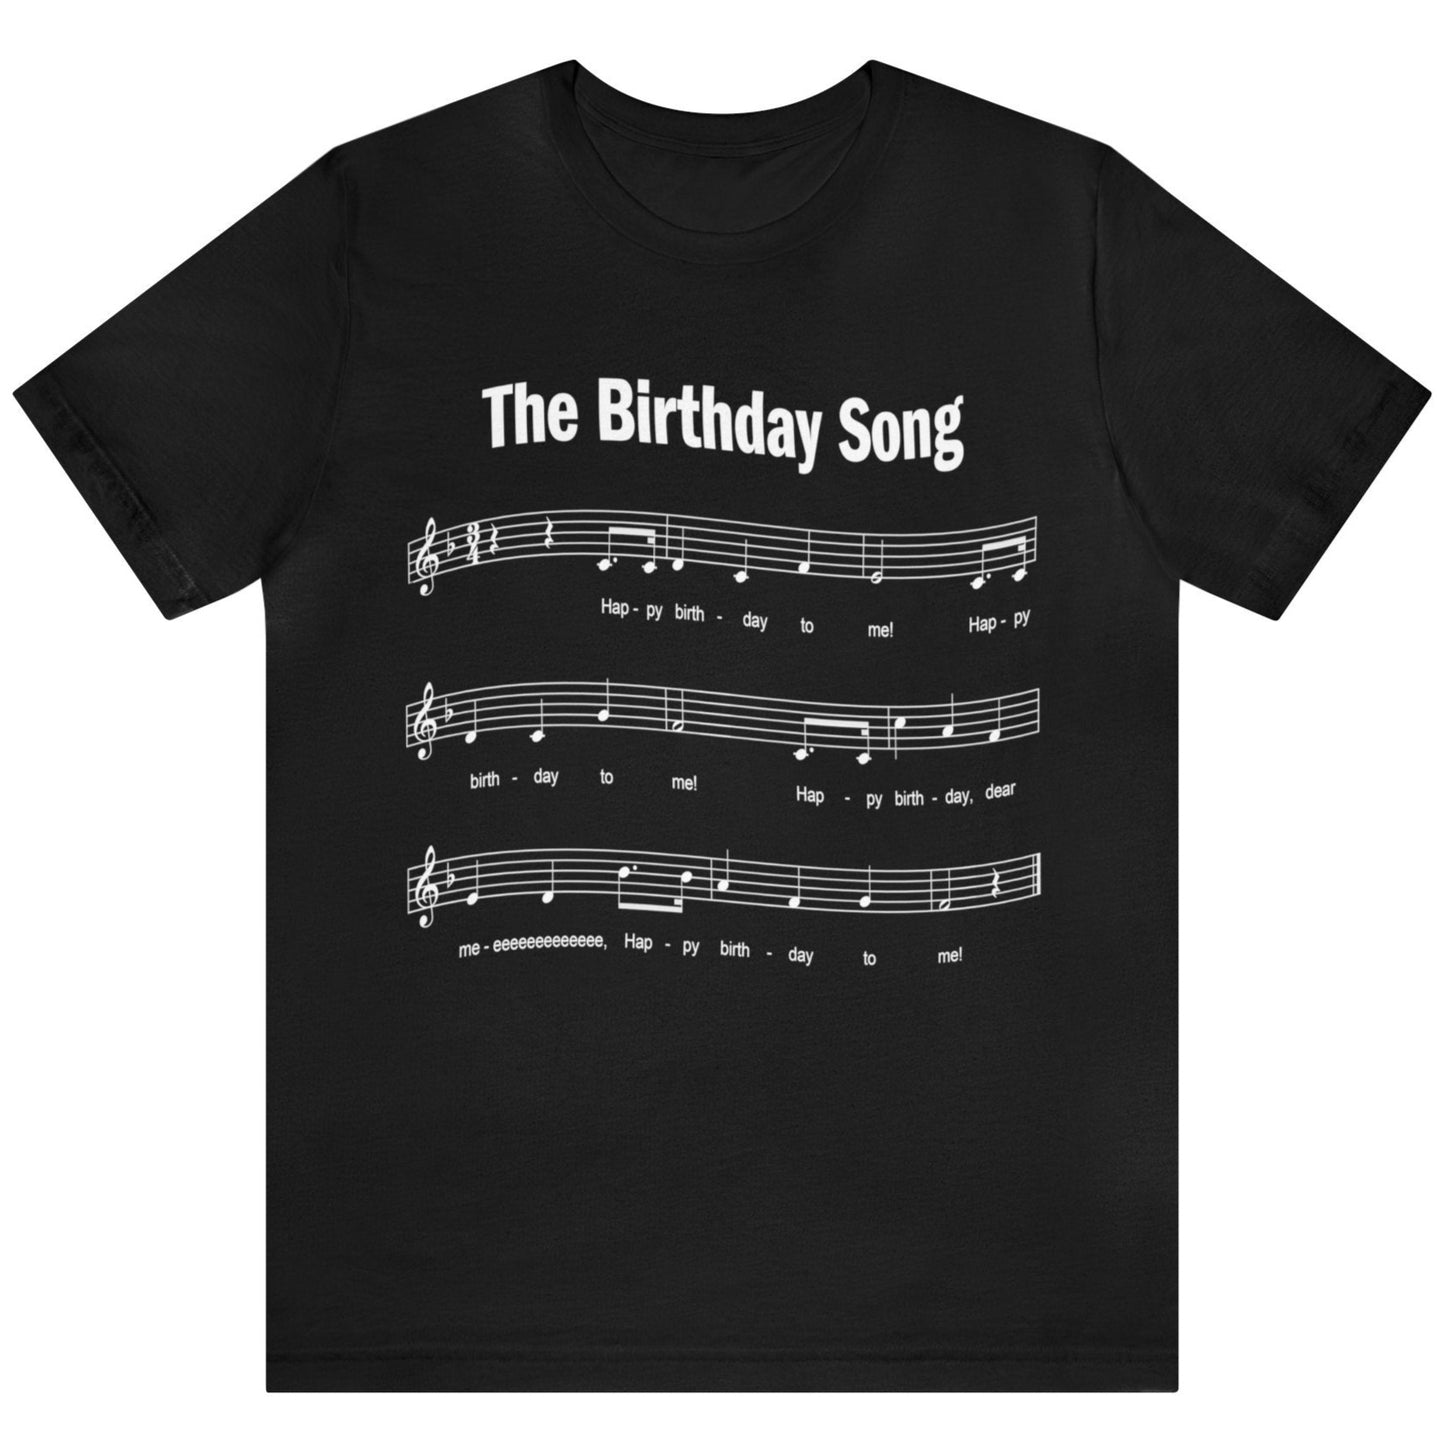 50th Birthday Gift T-shirt, Birthday Song FIVE OH!, 2-sided, Unisex Bella+Canvas 3001 T-shirt, Dark Colors, Funny Shirt for Surprise Parties